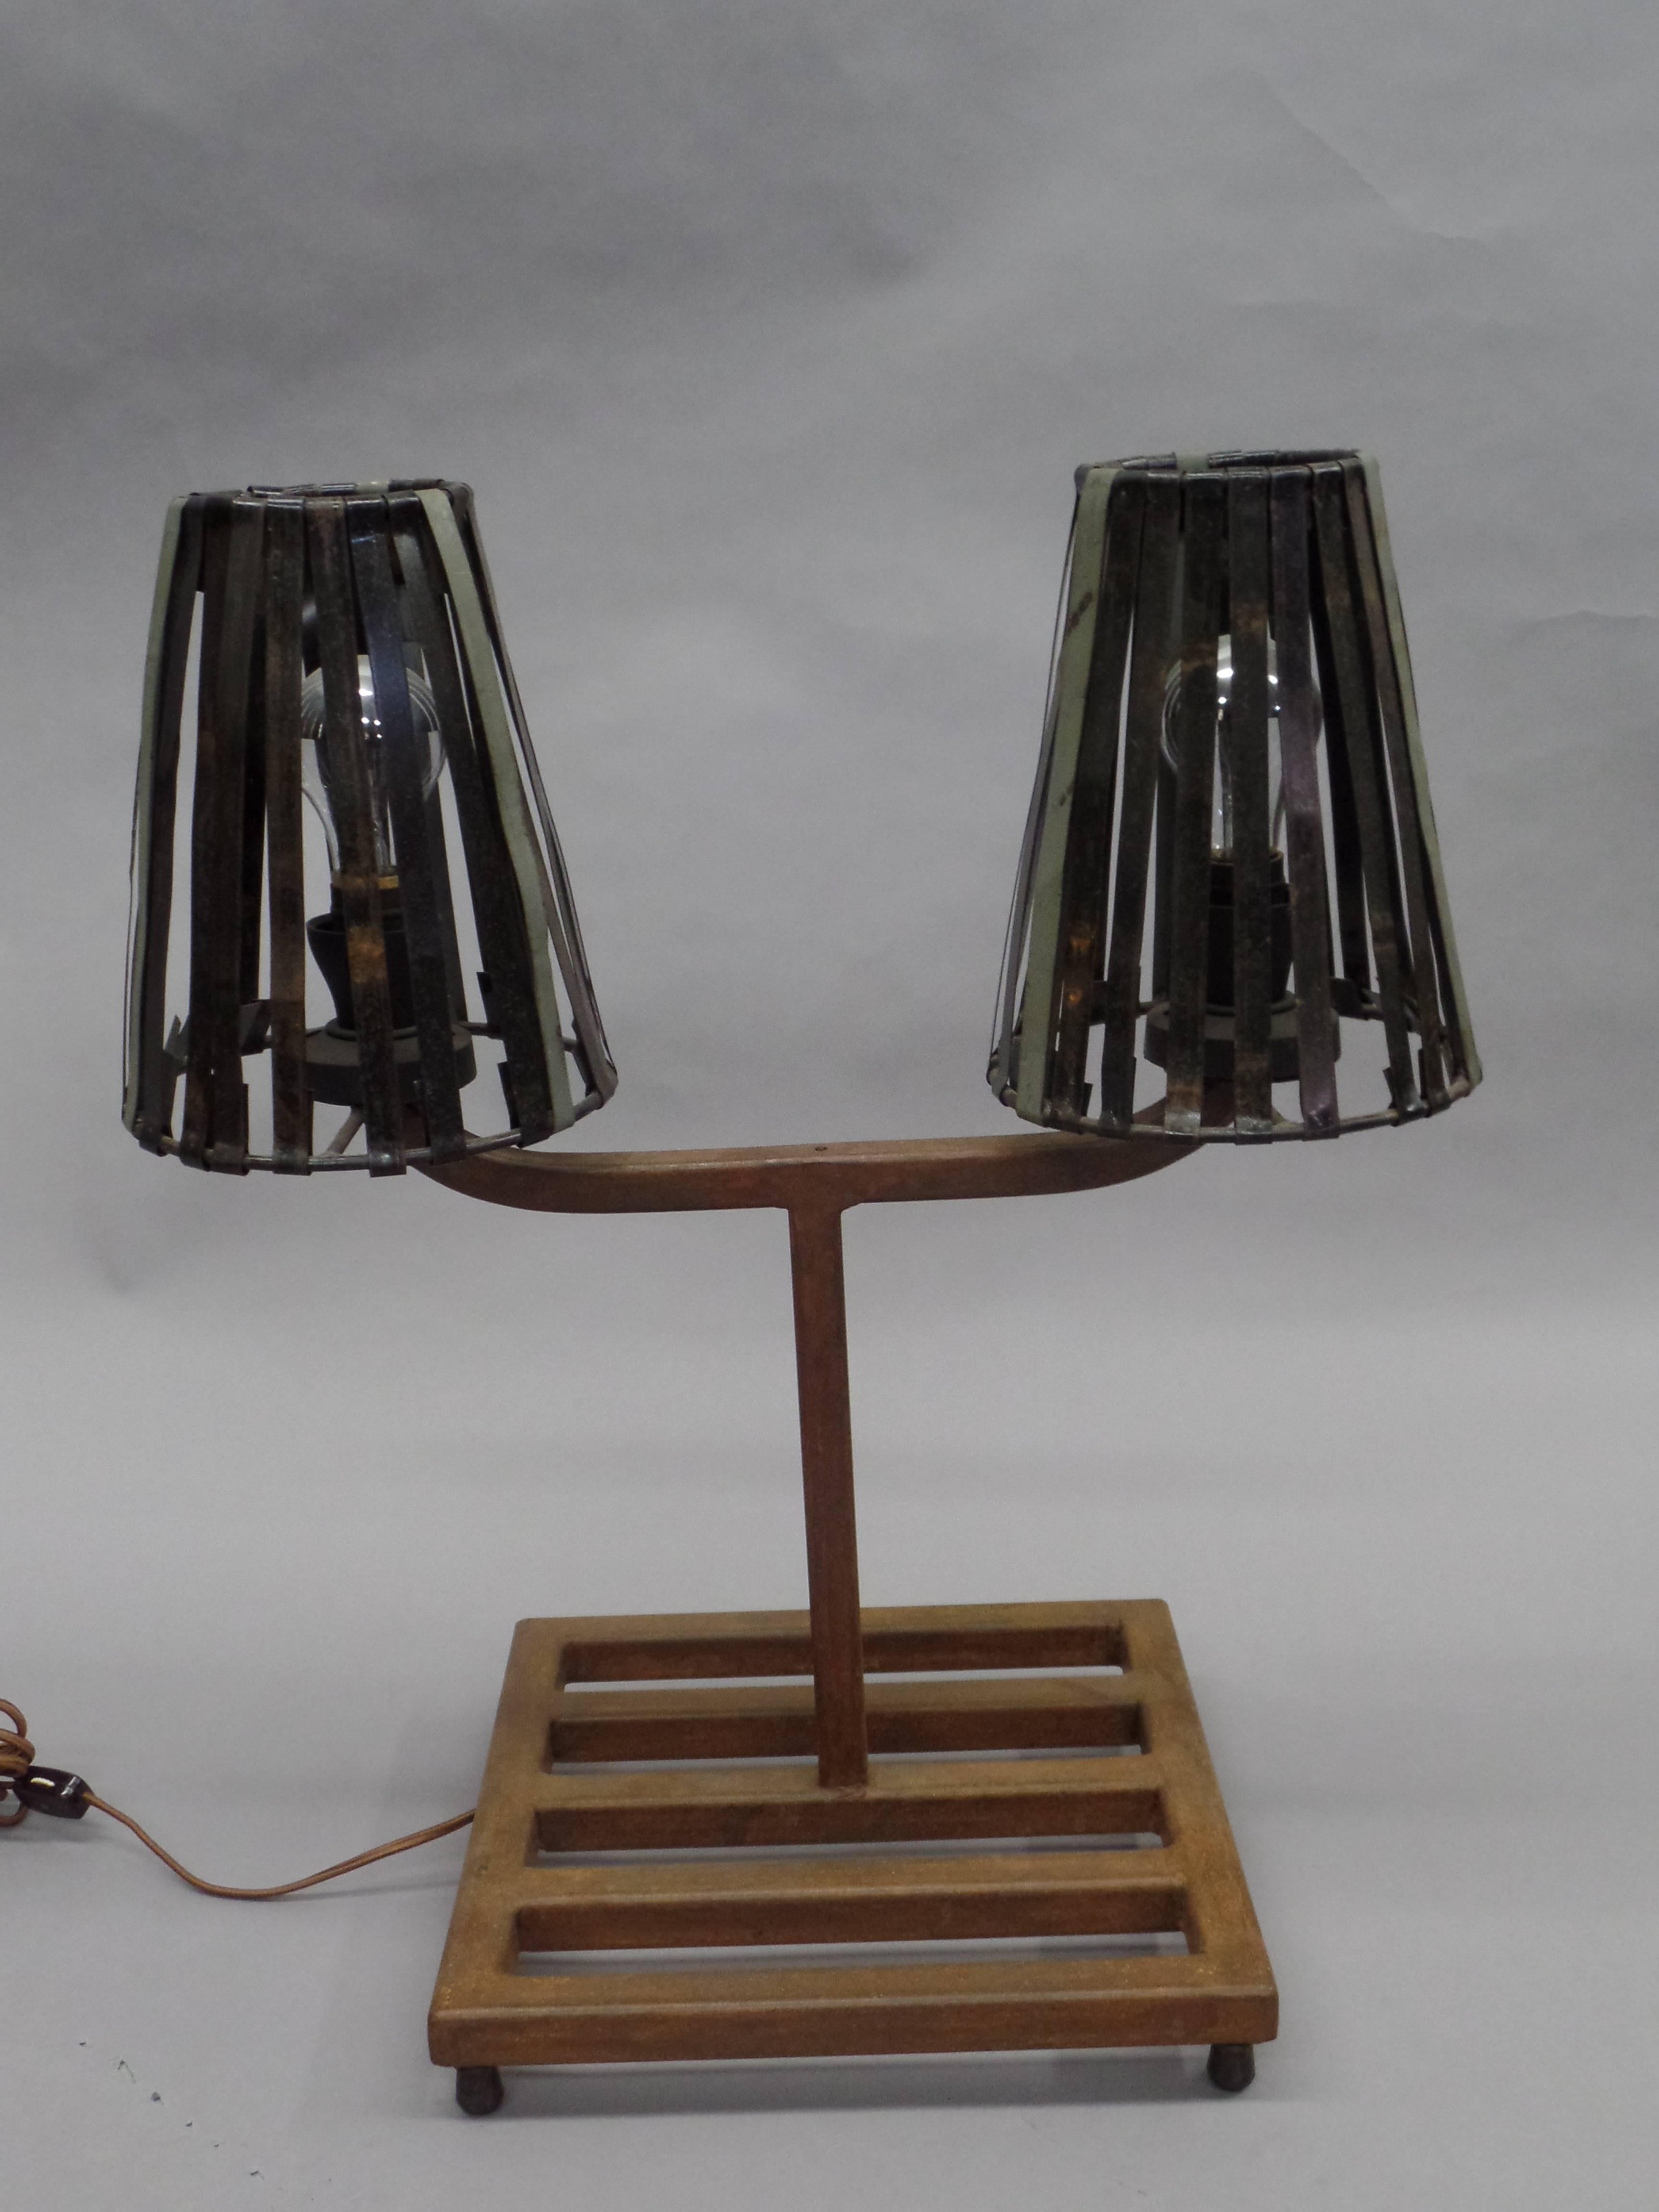 An original and stunning pair of French Mid-Century Modern table lamps in the style of Jean Prouvé. The pieces have a distinctive Industrial Design style consistent with Prouvé and are composed of patinated steel grill bases which support Y-form